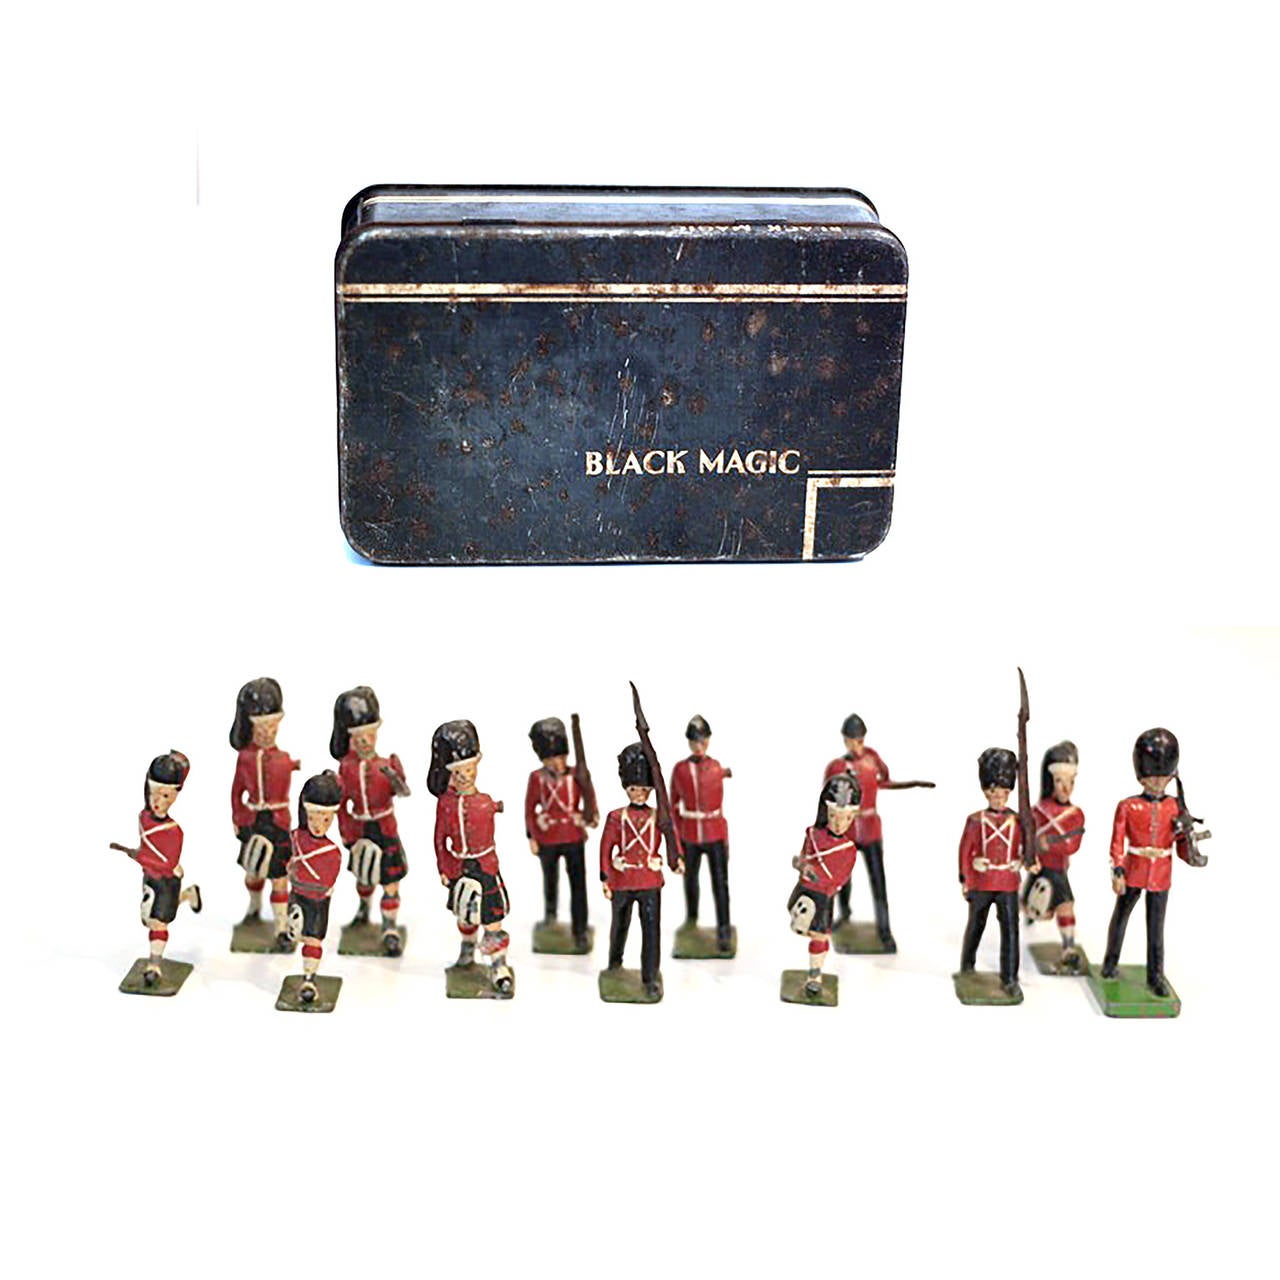 Collection of 13 painted lead toy soldiers. Made in England. Circa midcentury.